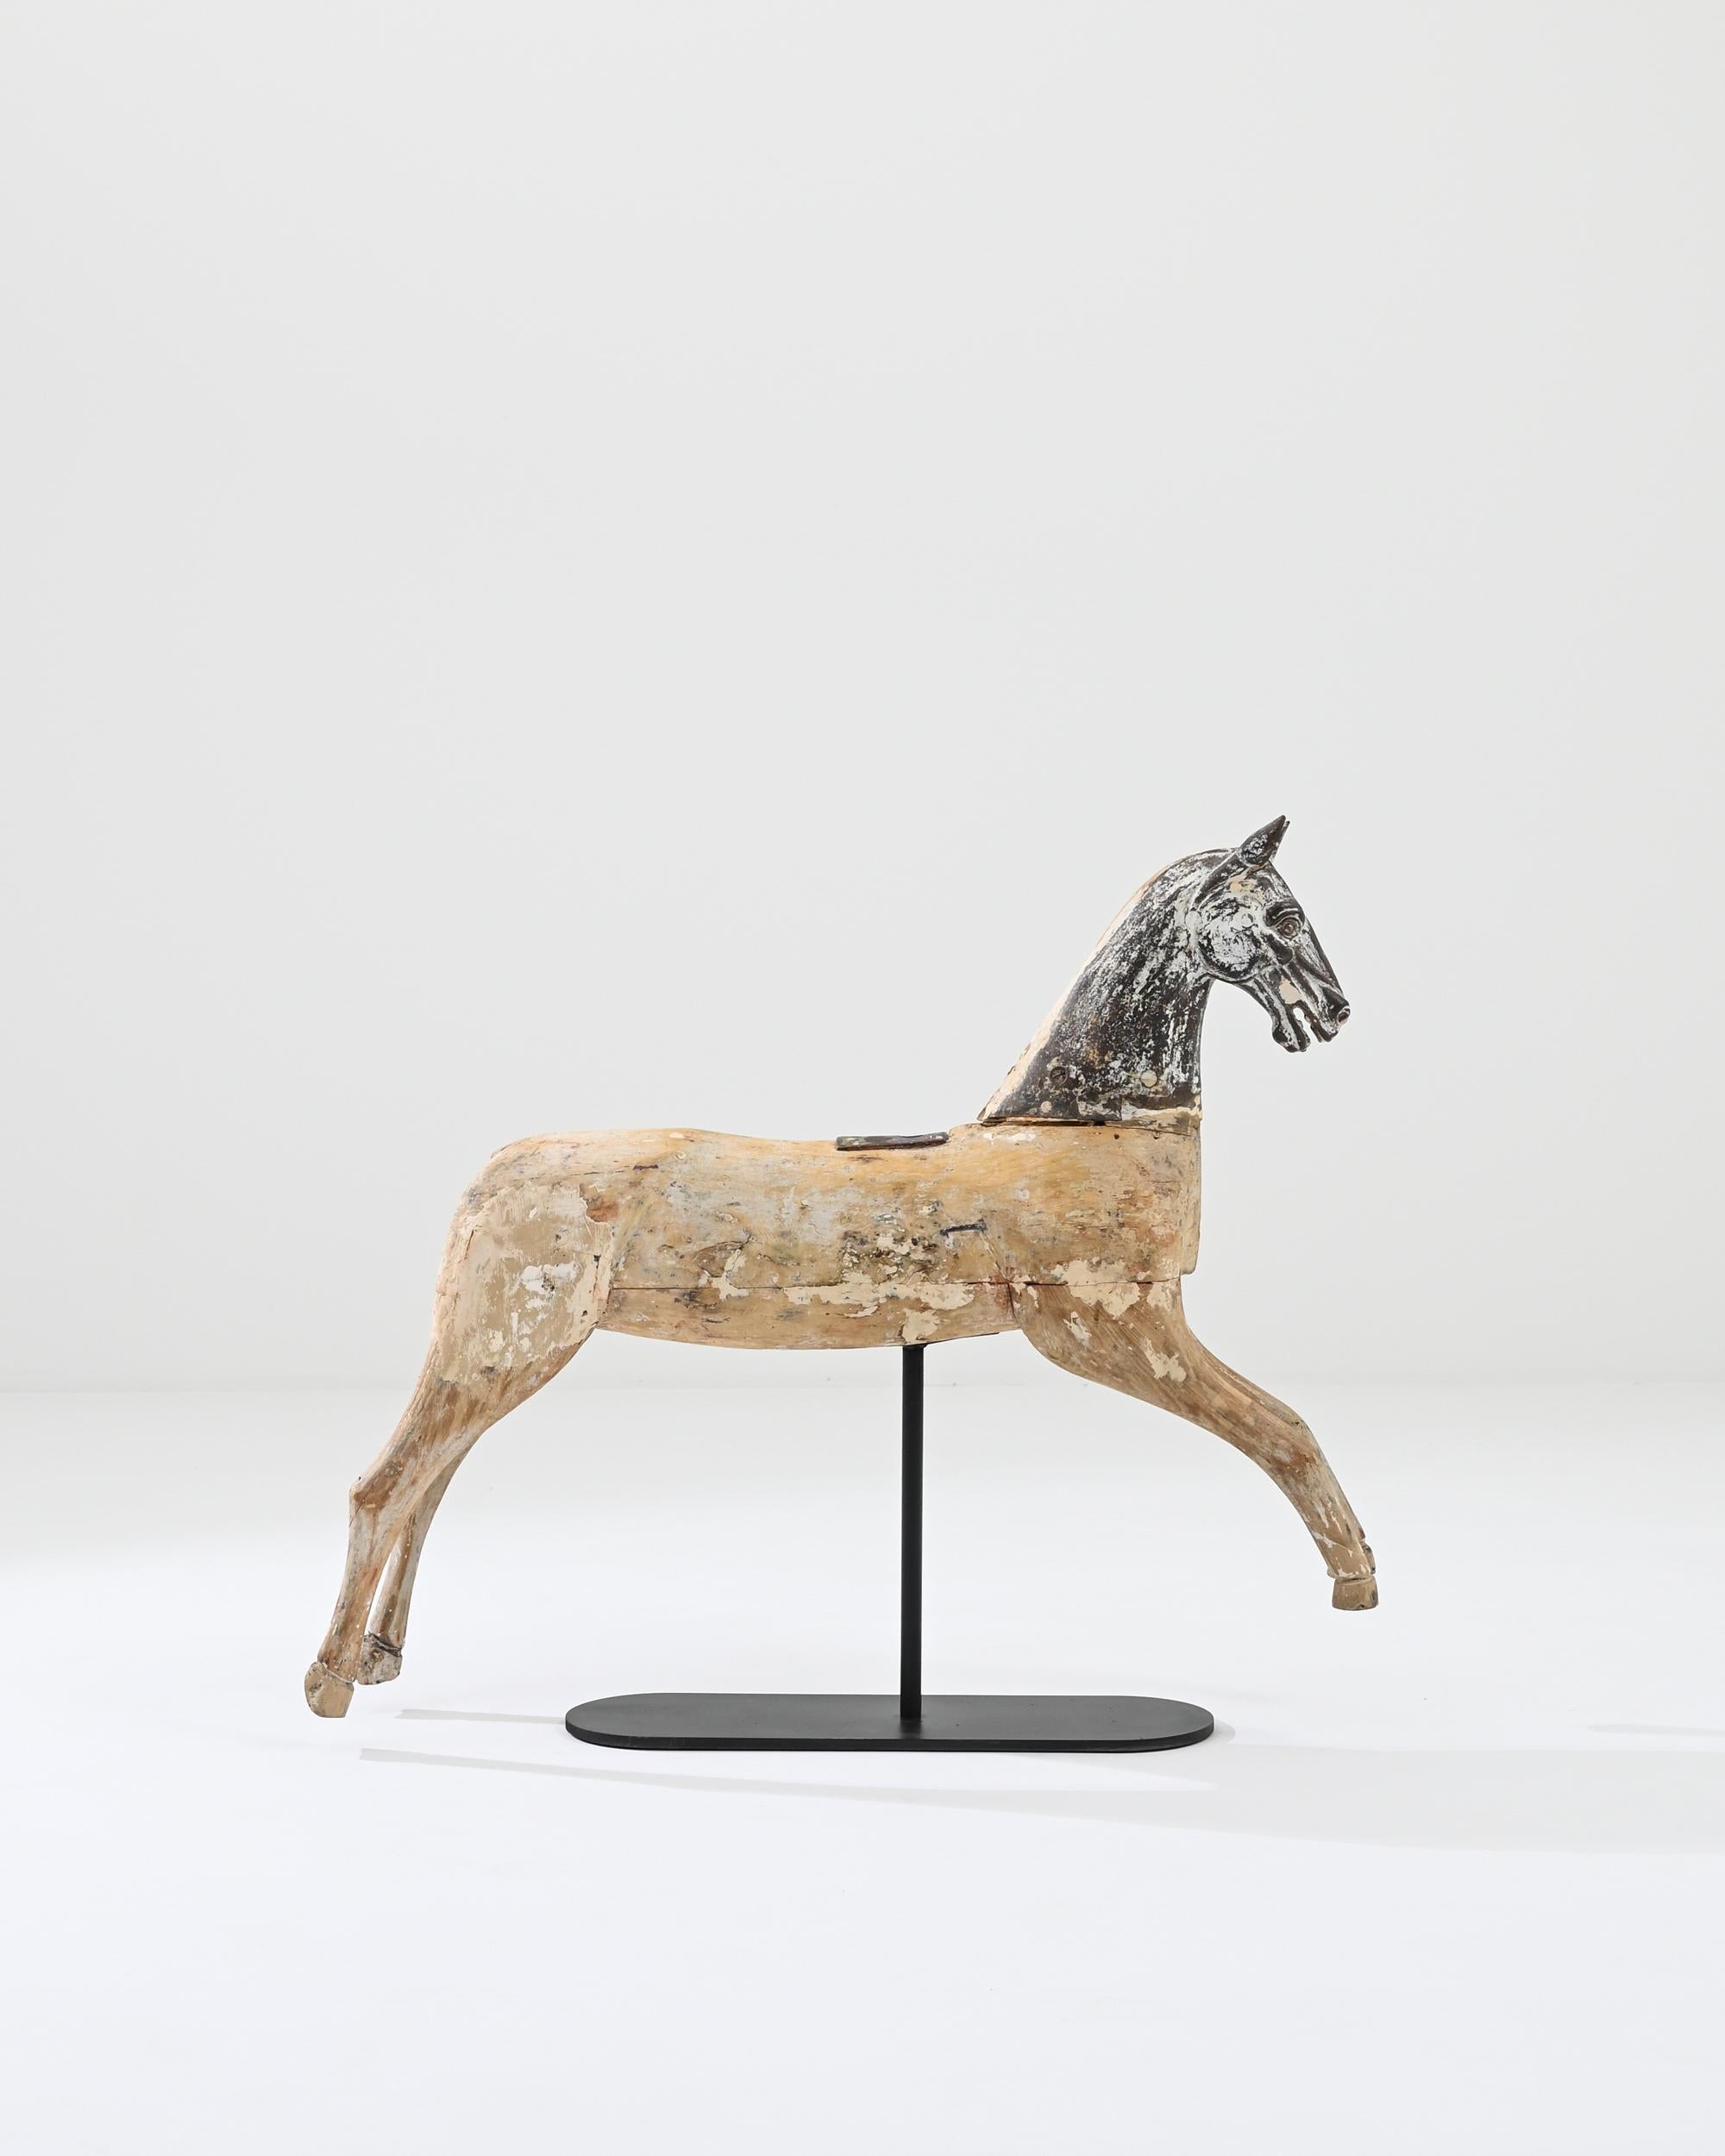 A wooden sculpture of a horse made in 19th century France. A horse mid-gallop has been frozen in time by the immaculate sculpting of 19th century artisans. Its springing legs and upbeat expression exude an energy of play, while the dramatic patina